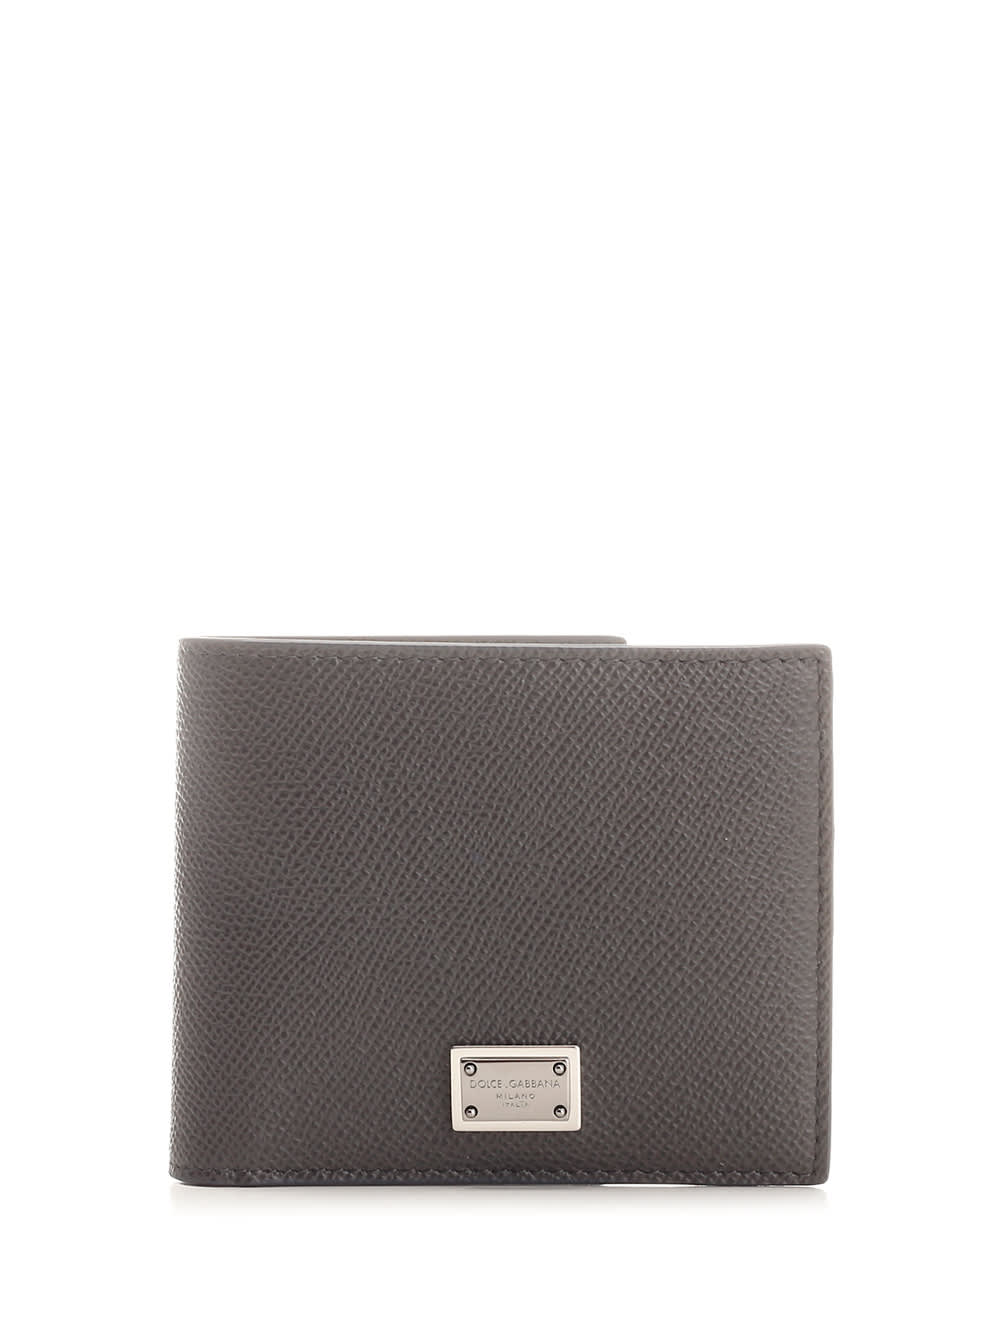 DOLCE & GABBANA BIFOLD WALLET WITH TAG